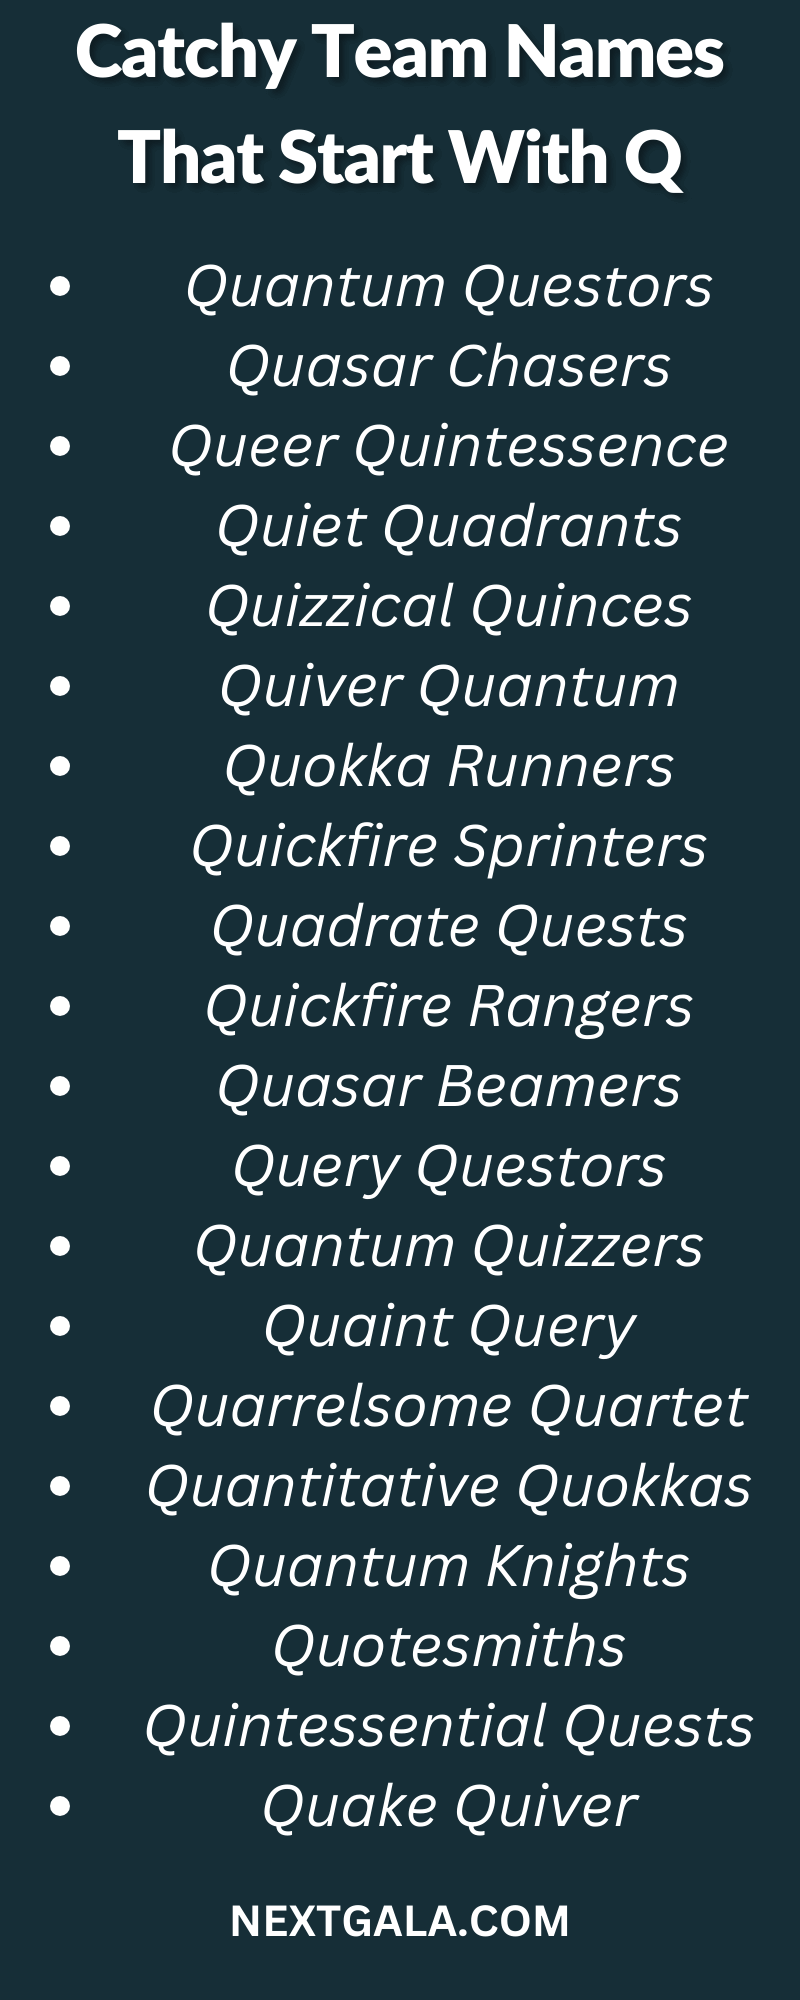 Team Names That Start With Q